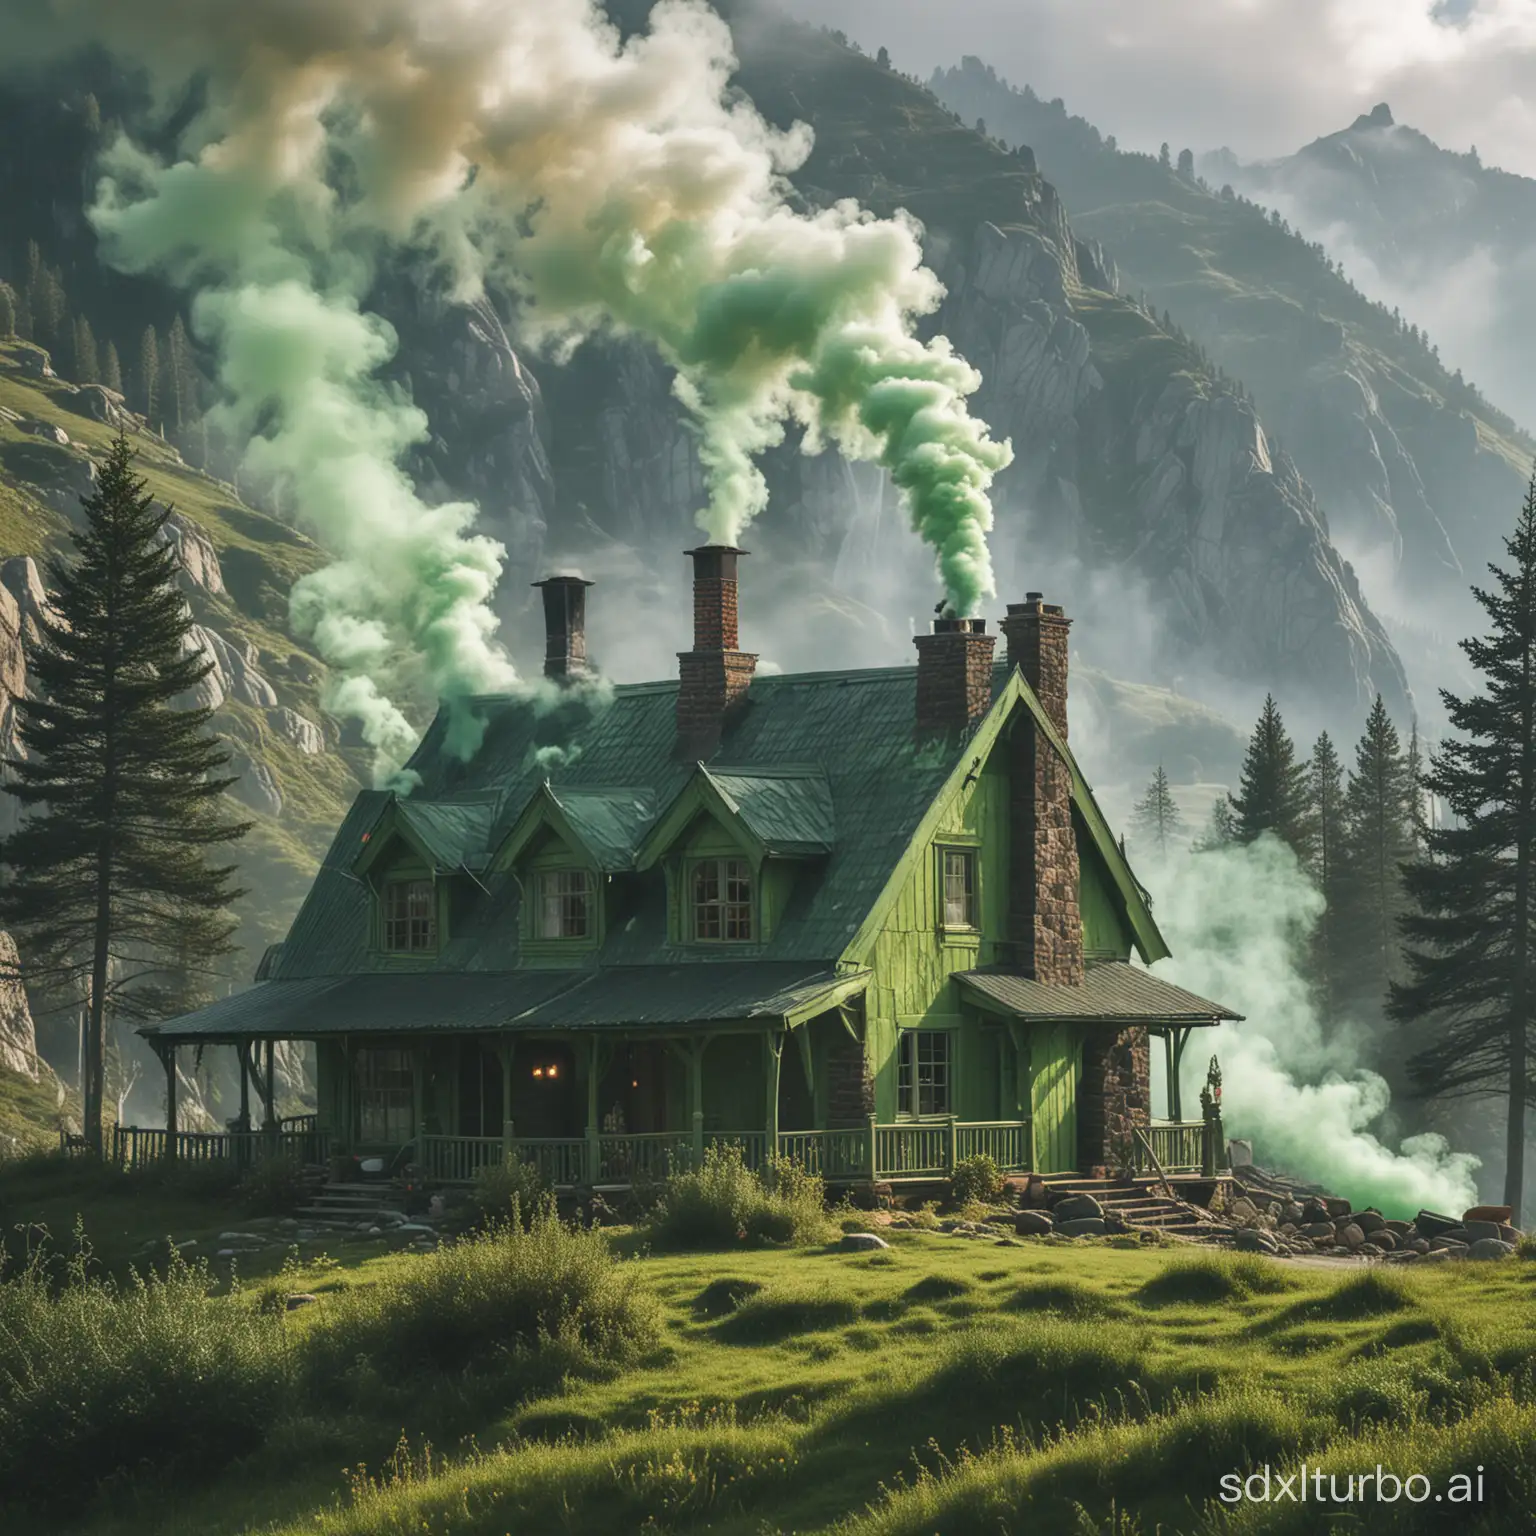 image of a house in the mountains with two chimneys emitting green smoke while the Grinch climbs the mountain